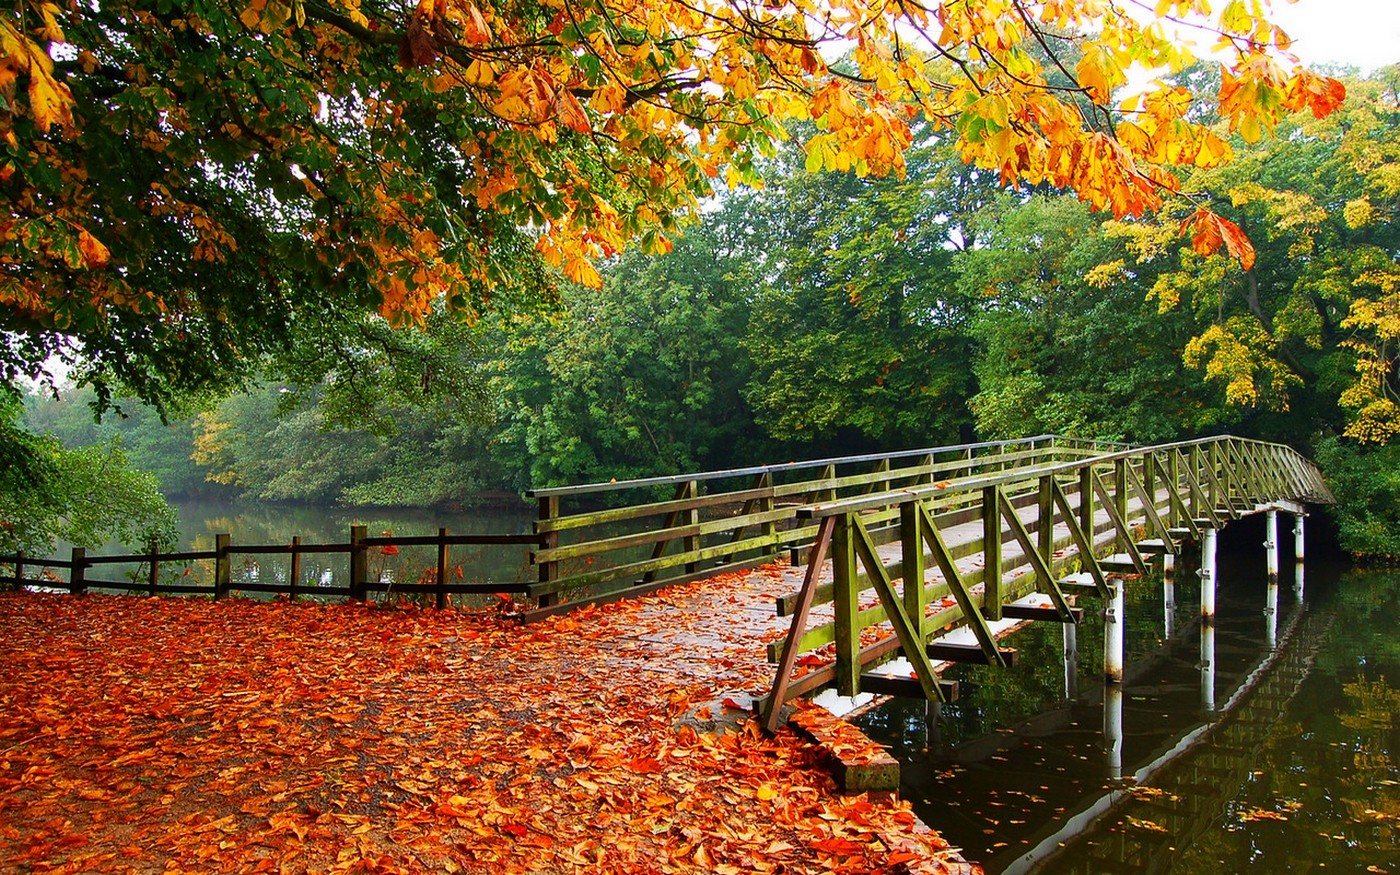 General 1400x875 nature landscape leaves fall trees bridge walkway river overcast fallen leaves outdoors